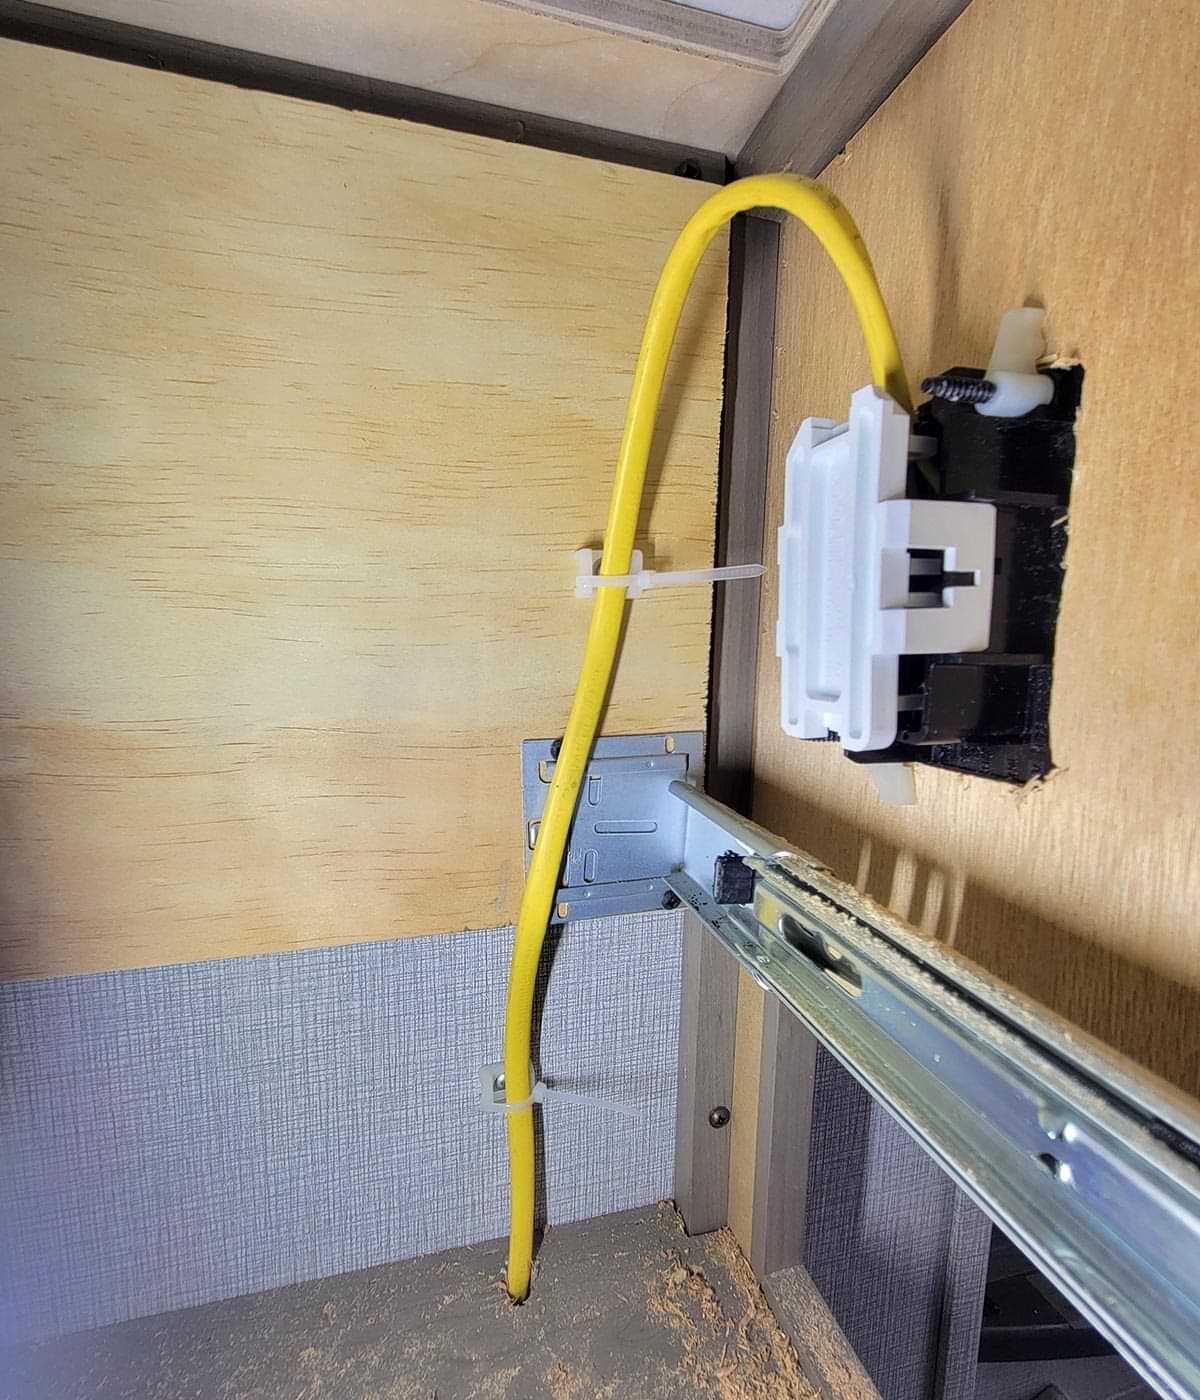 inside/back view of the outlet installed with the Romex secured tightly against the wall using small clamps